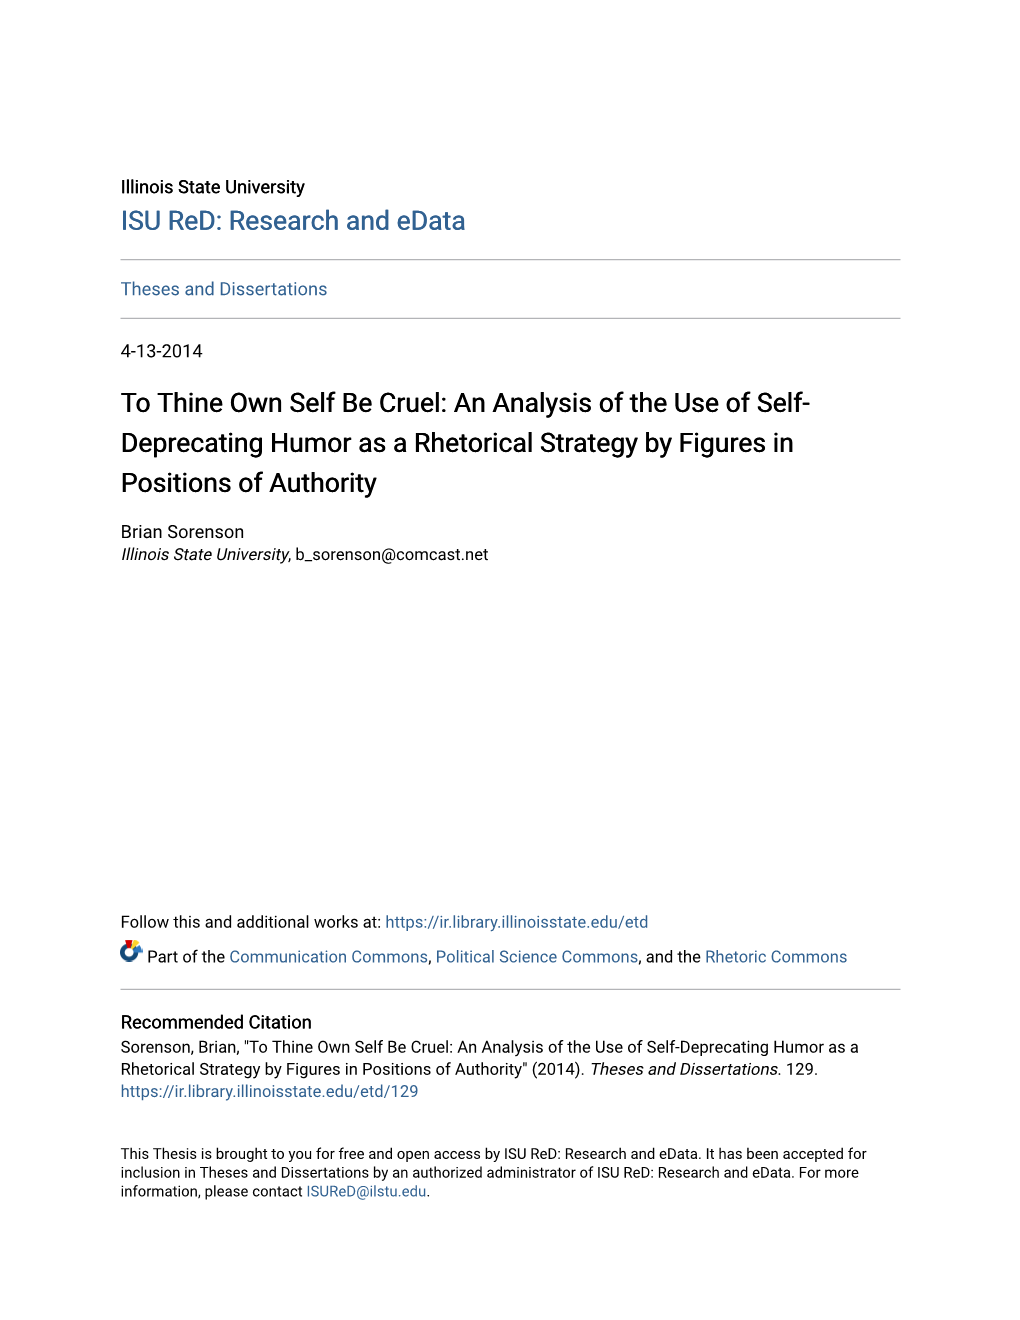 To Thine Own Self Be Cruel: an Analysis of the Use of Self- Deprecating Humor As a Rhetorical Strategy by Figures in Positions of Authority